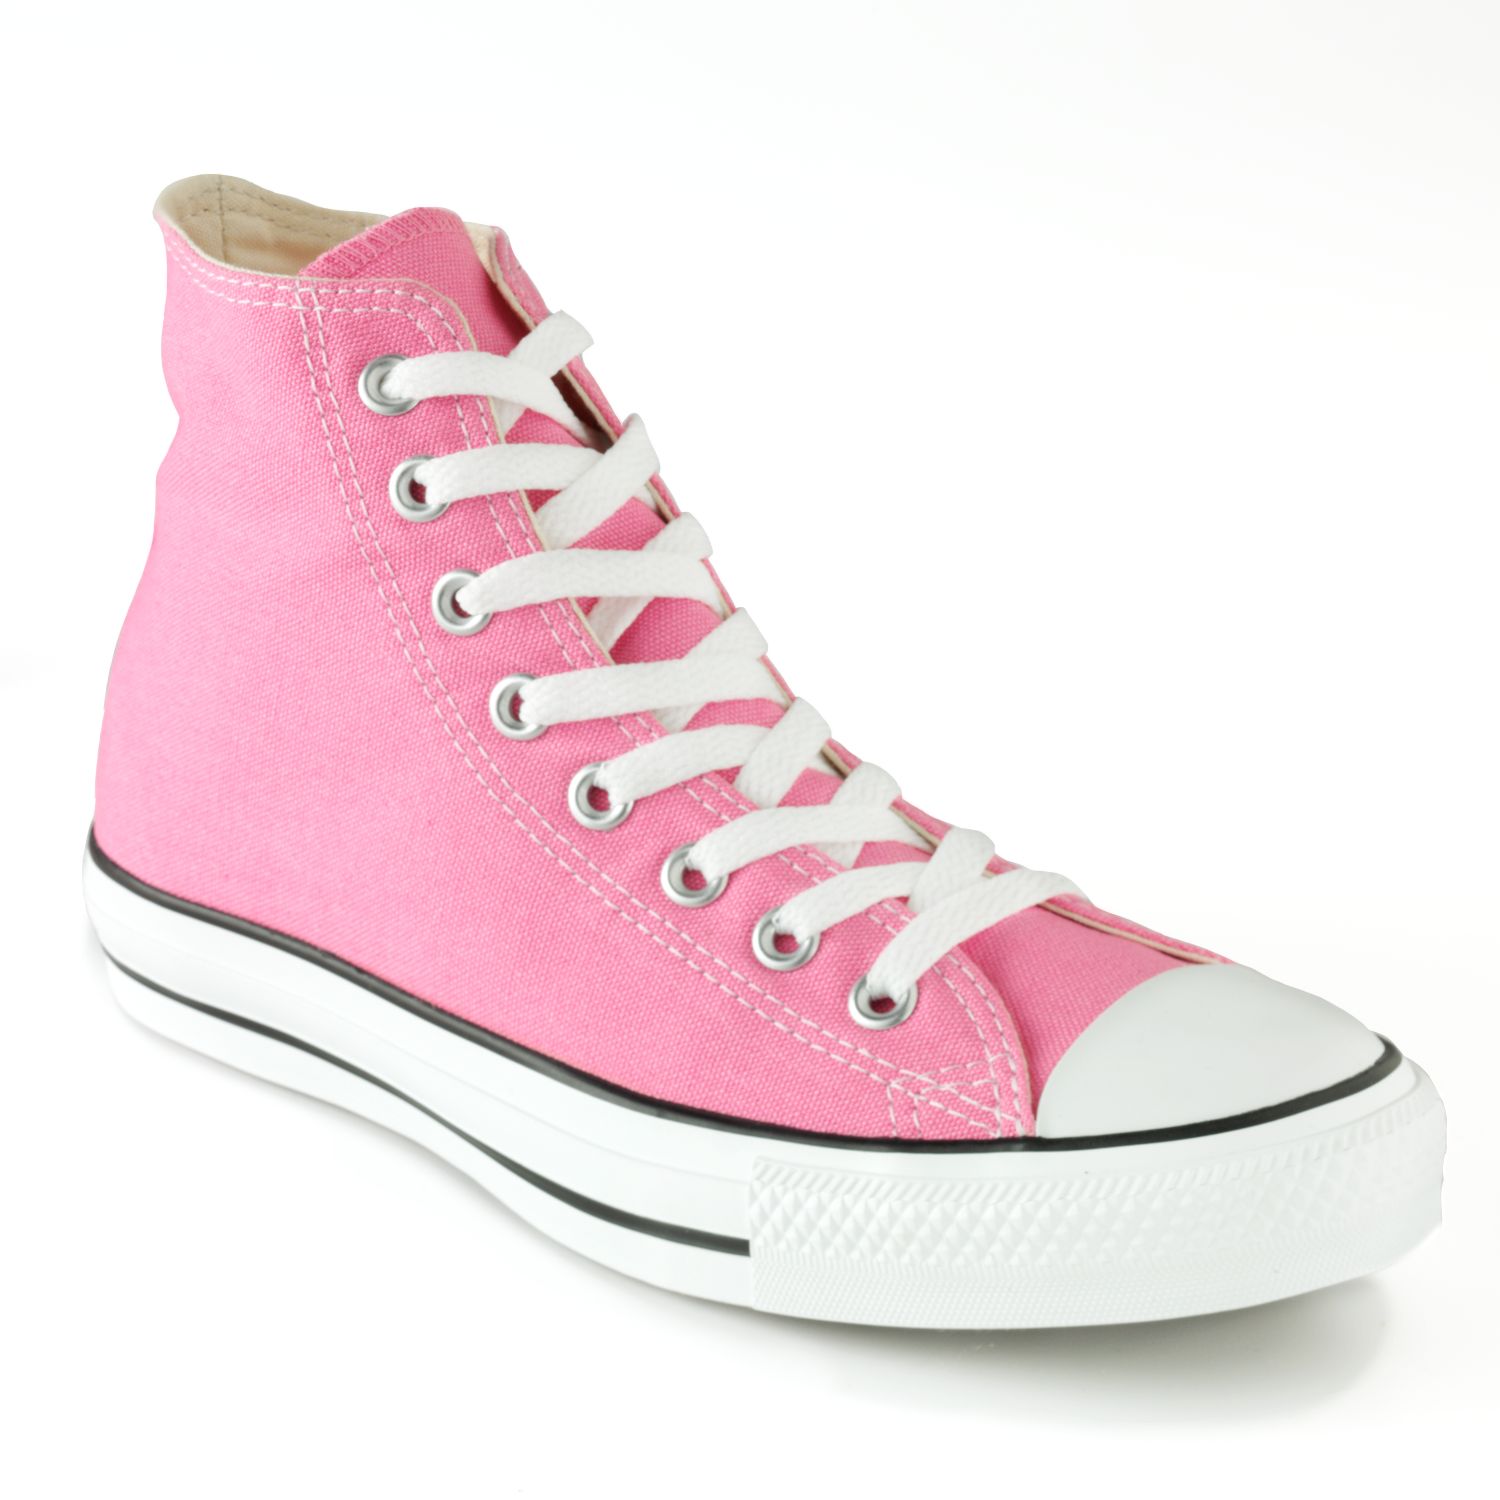 pink converse shoes